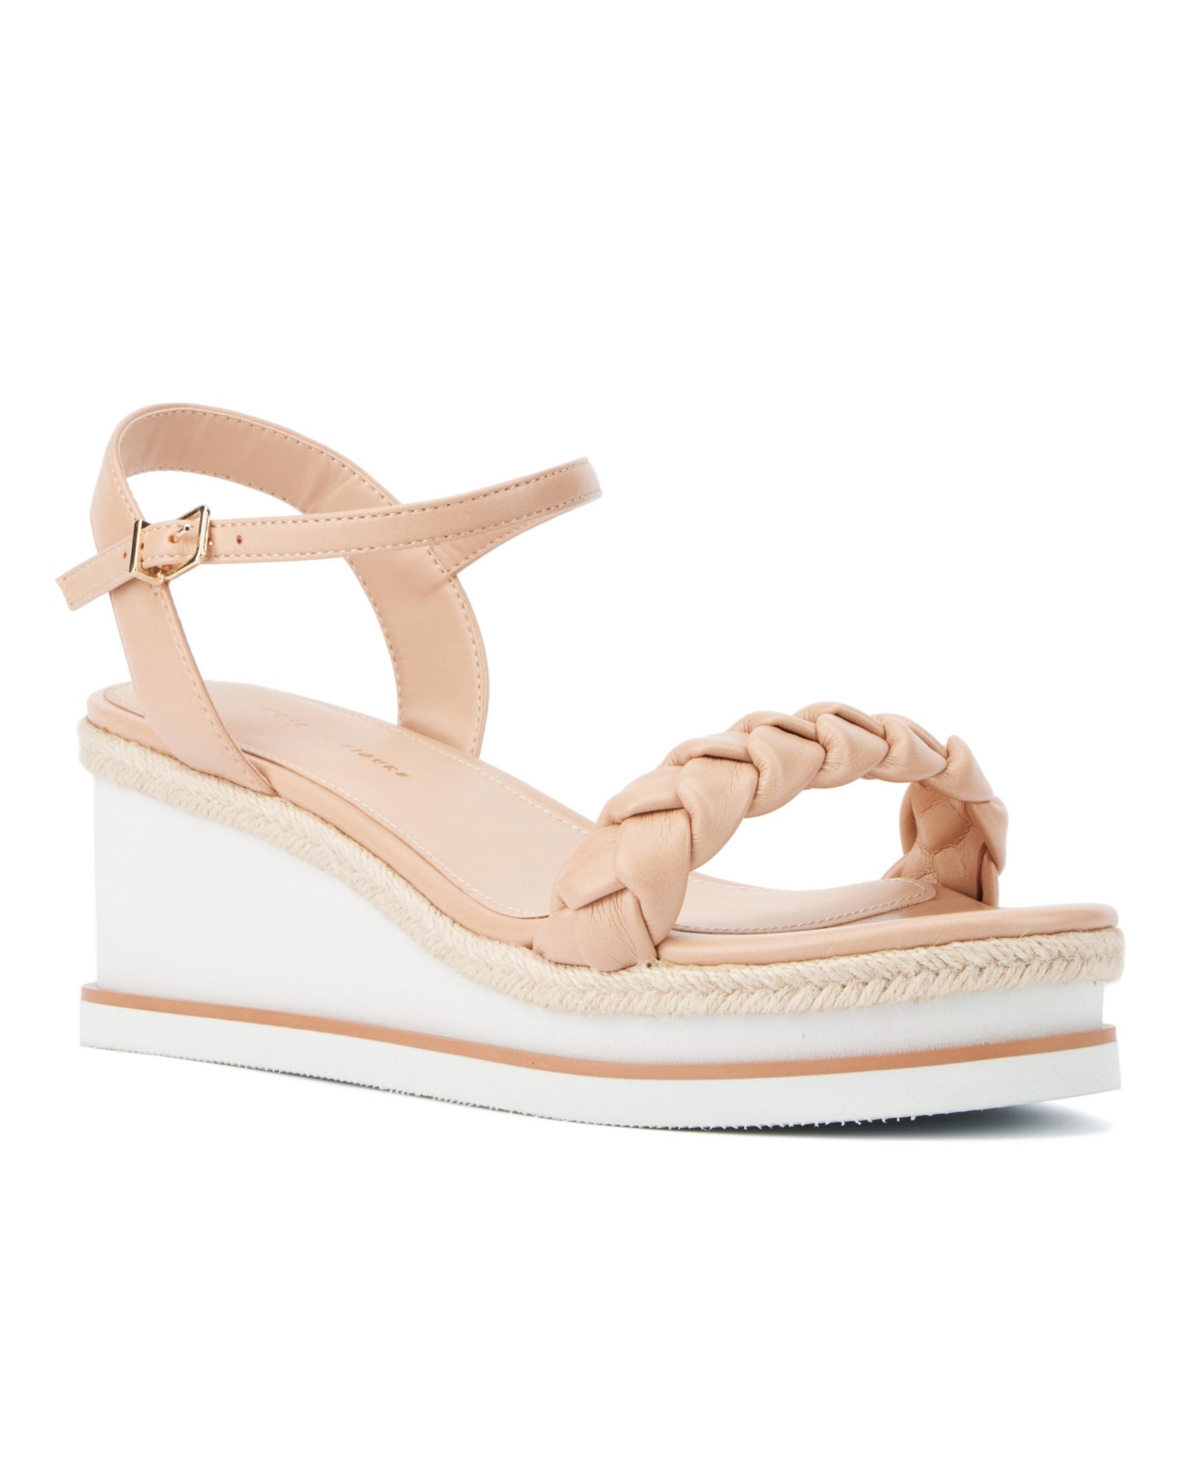 Fashion To Figure Women's Veronica Wide Width Wedge Sandals